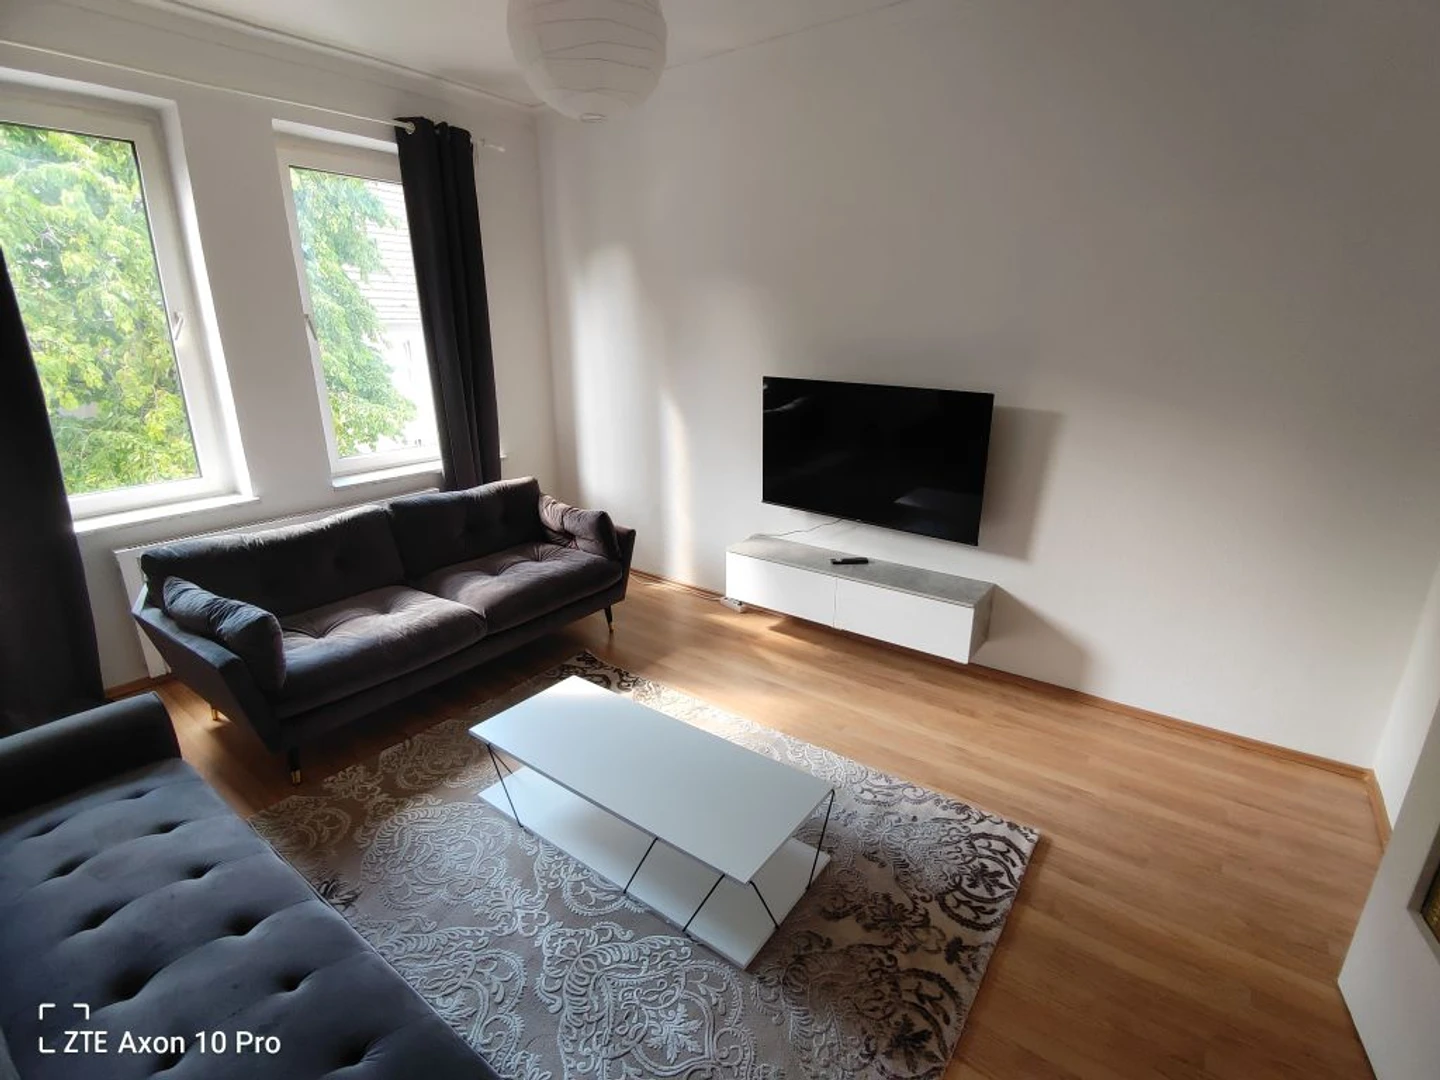 Accommodation with 3 bedrooms in Essen